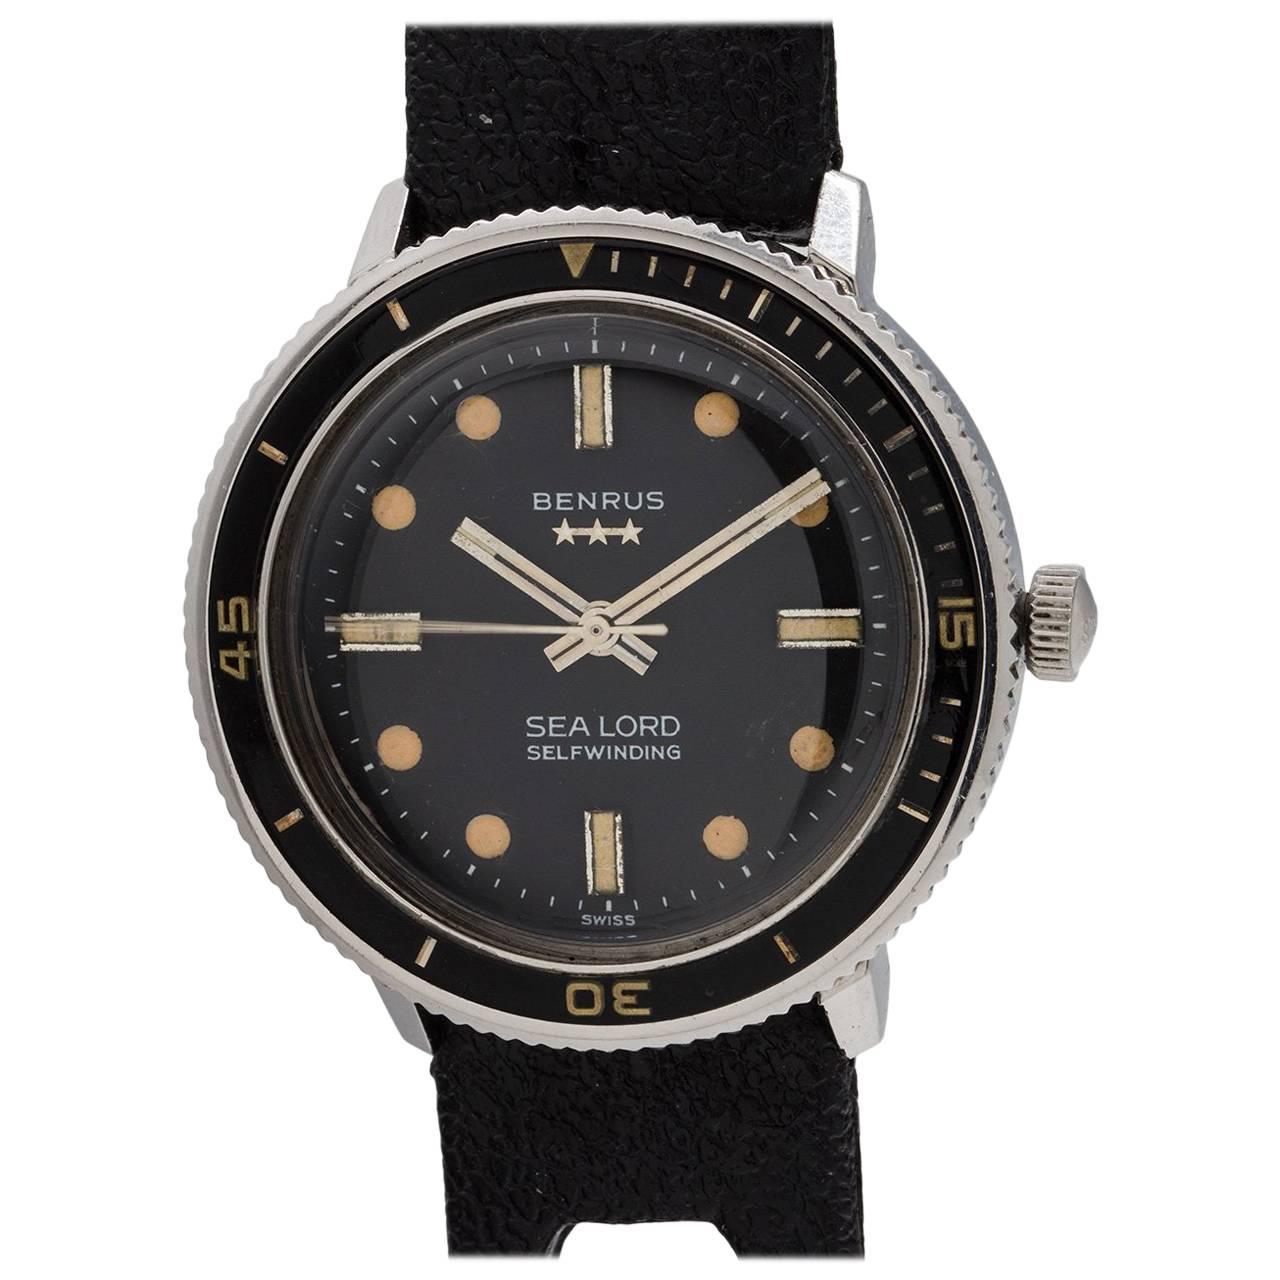 Benrus stainless steel Sea Lord Diver's Wristwatch, circa 1960s